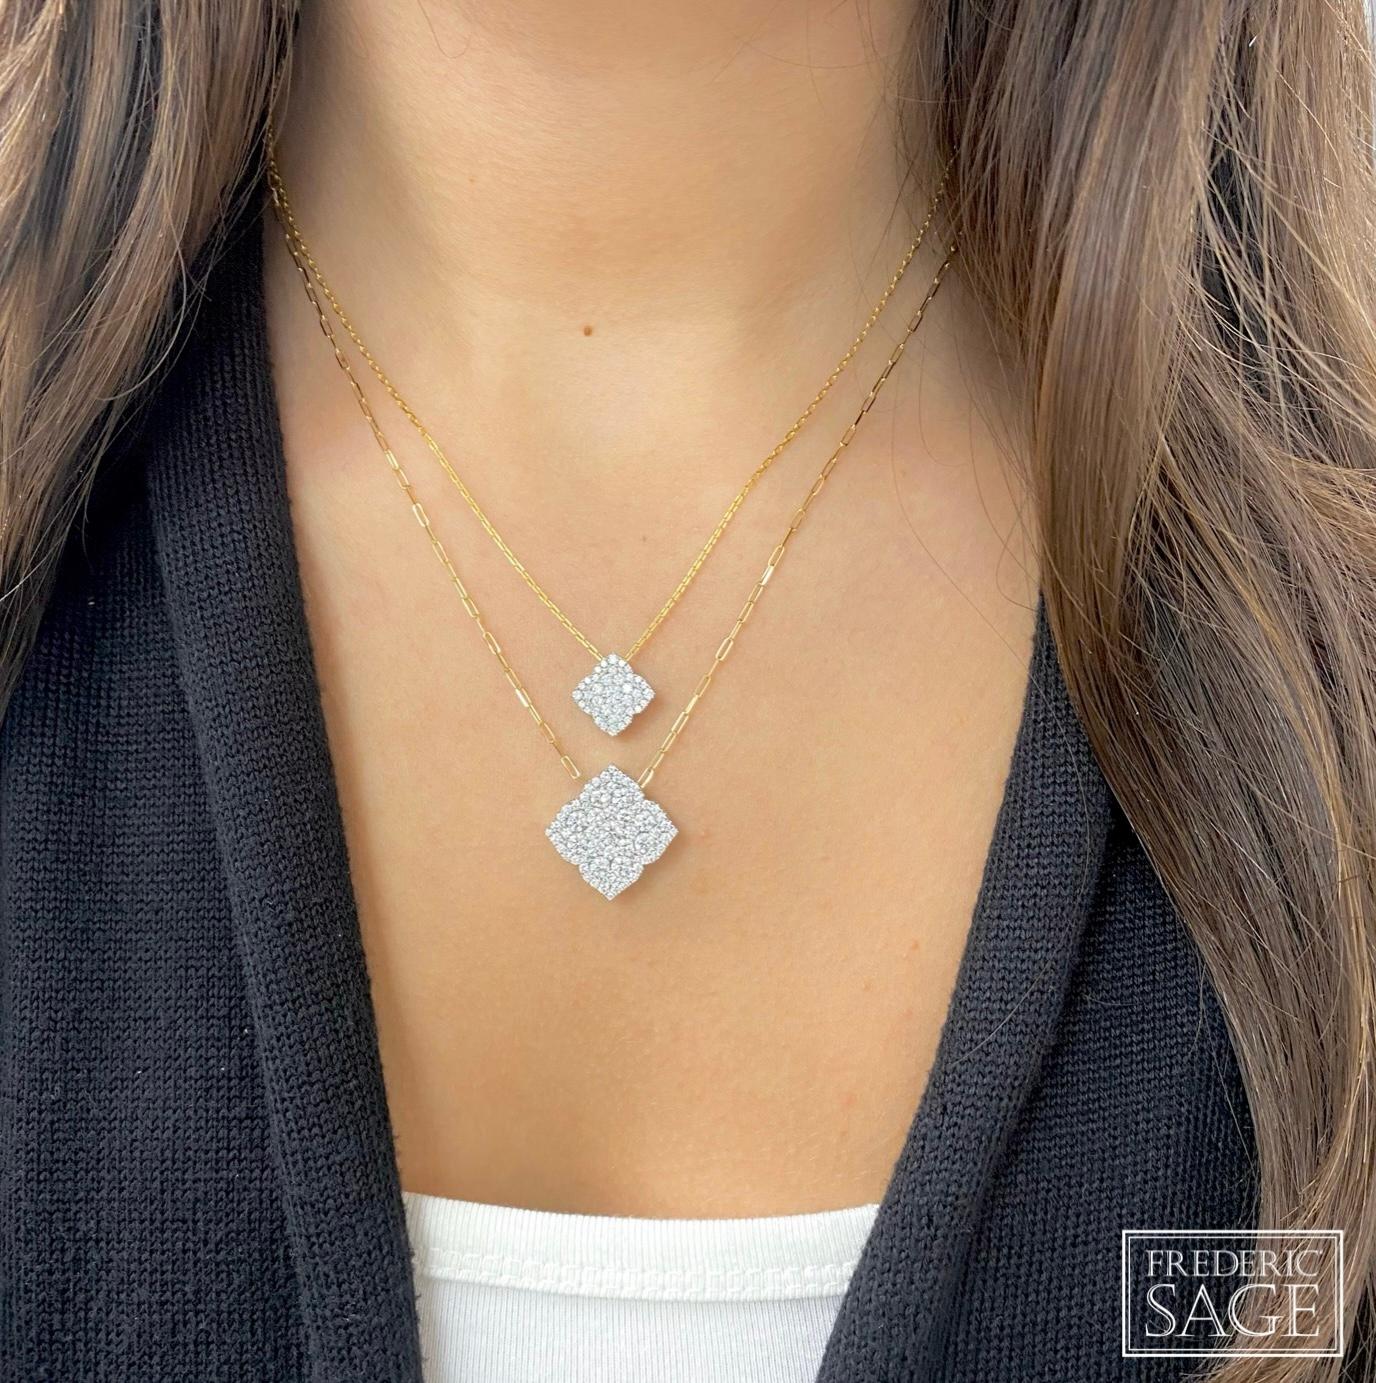 Grande Fleur D’Amour All Diamond Pendant With Hidden Bale And With Chain, 1.88 Ct, (approximately 20 mm)

Available in other metal/ gemstone options: This Diamond pendant can be made in white, pink or yellow gold. Matching earrings, bangle and ring